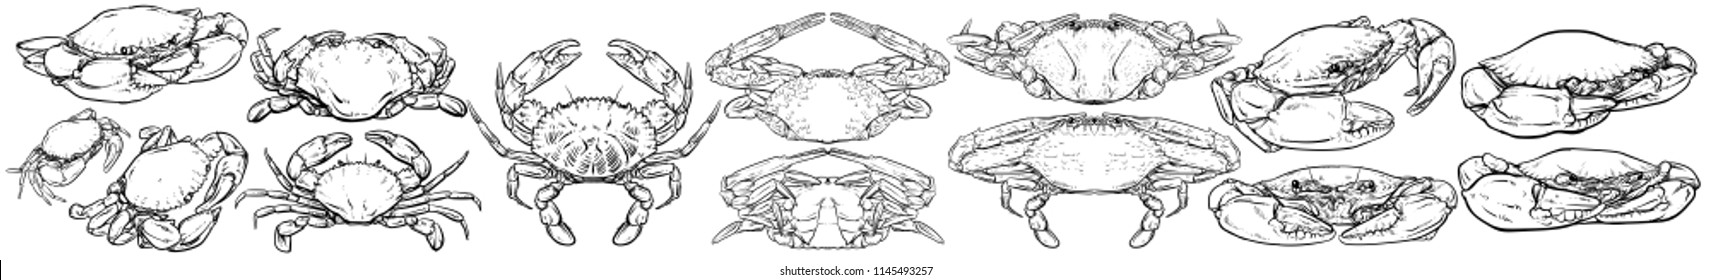 Crab vector set, Hand drawn vector illustration, Collection of realistic sketches various crabs